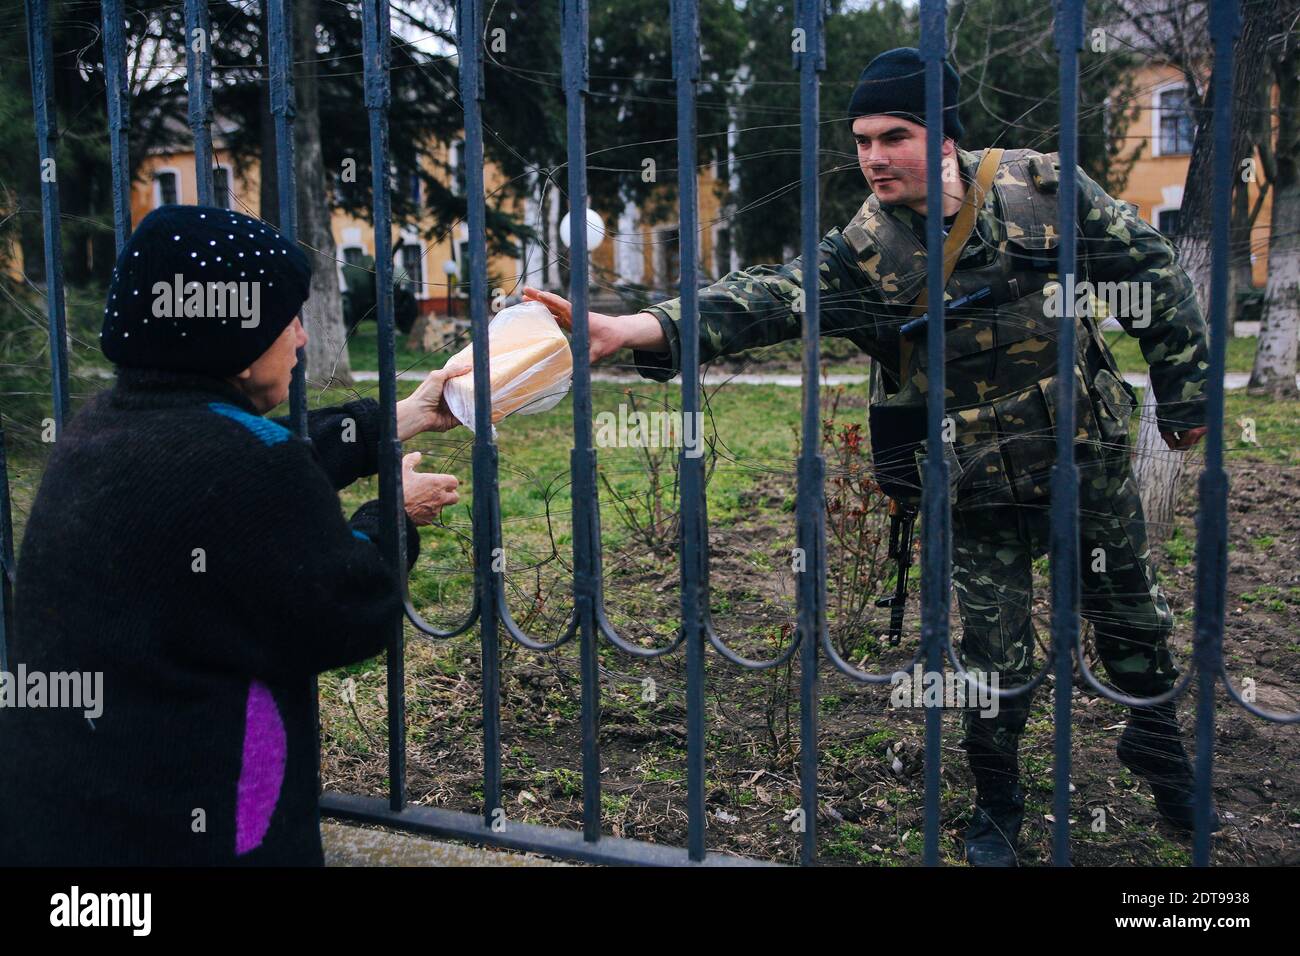 A woman gives food to a Ukranian soldier standing guard inside the Ukranian base in Simferopol. Simferopol, Ukraine, on March 19, 2014. Tensions are rising in Crimea after pro-Russia forces seized two naval bases including Ukraine's navy HQ. Russia has called on authorities there to release the detained commander of the Ukrainian navy. Photo by Rafael Yaghobzadeh/ABACAPRESS.COM Stock Photo